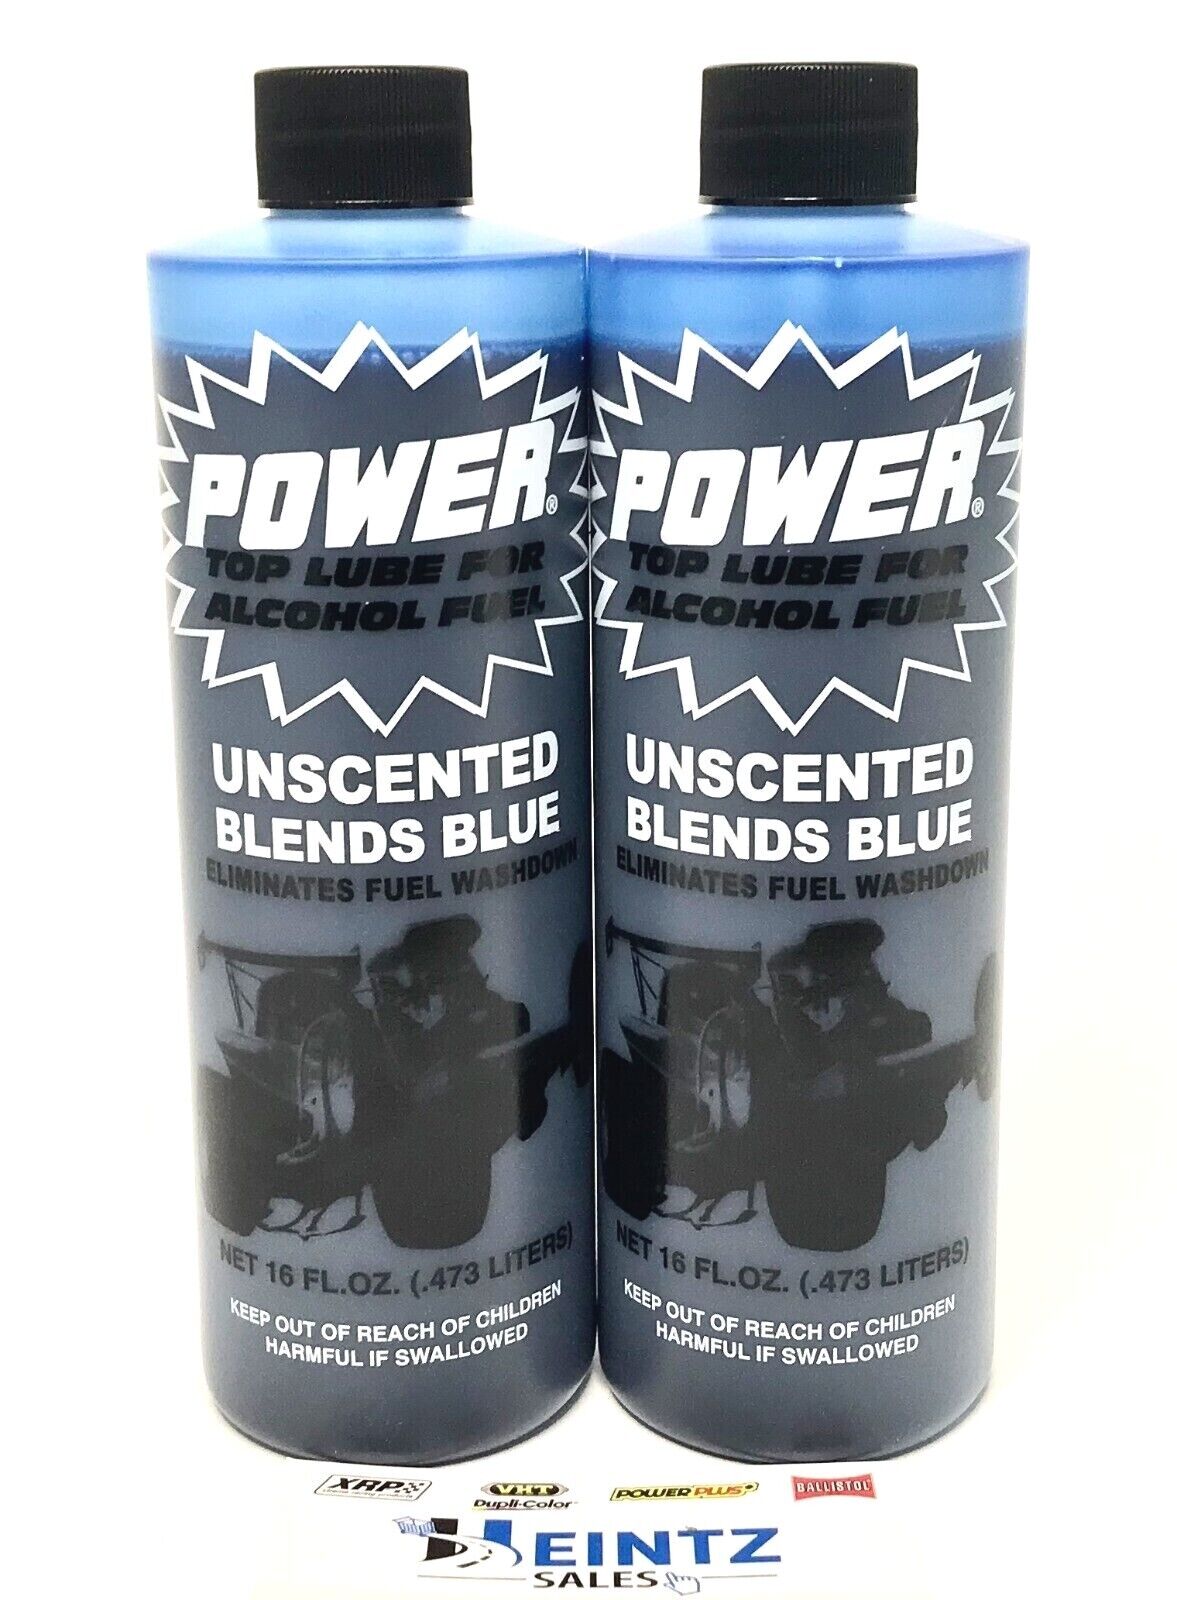 Power Plus UNSCENTED BLUE Lubricant 2 PACK Fuel Additive Alcohol Top Lube